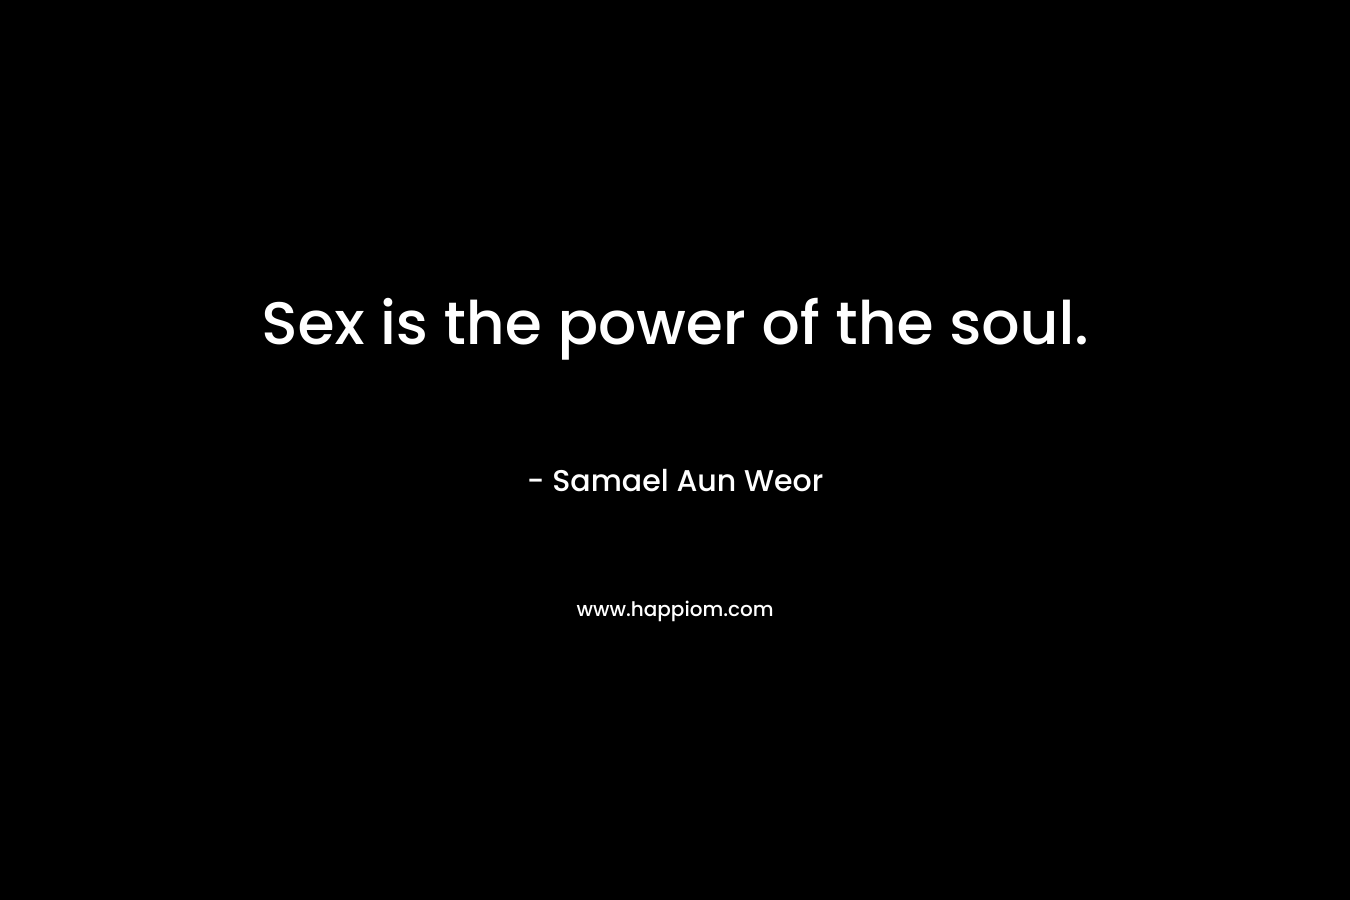 Sex is the power of the soul. – Samael Aun Weor